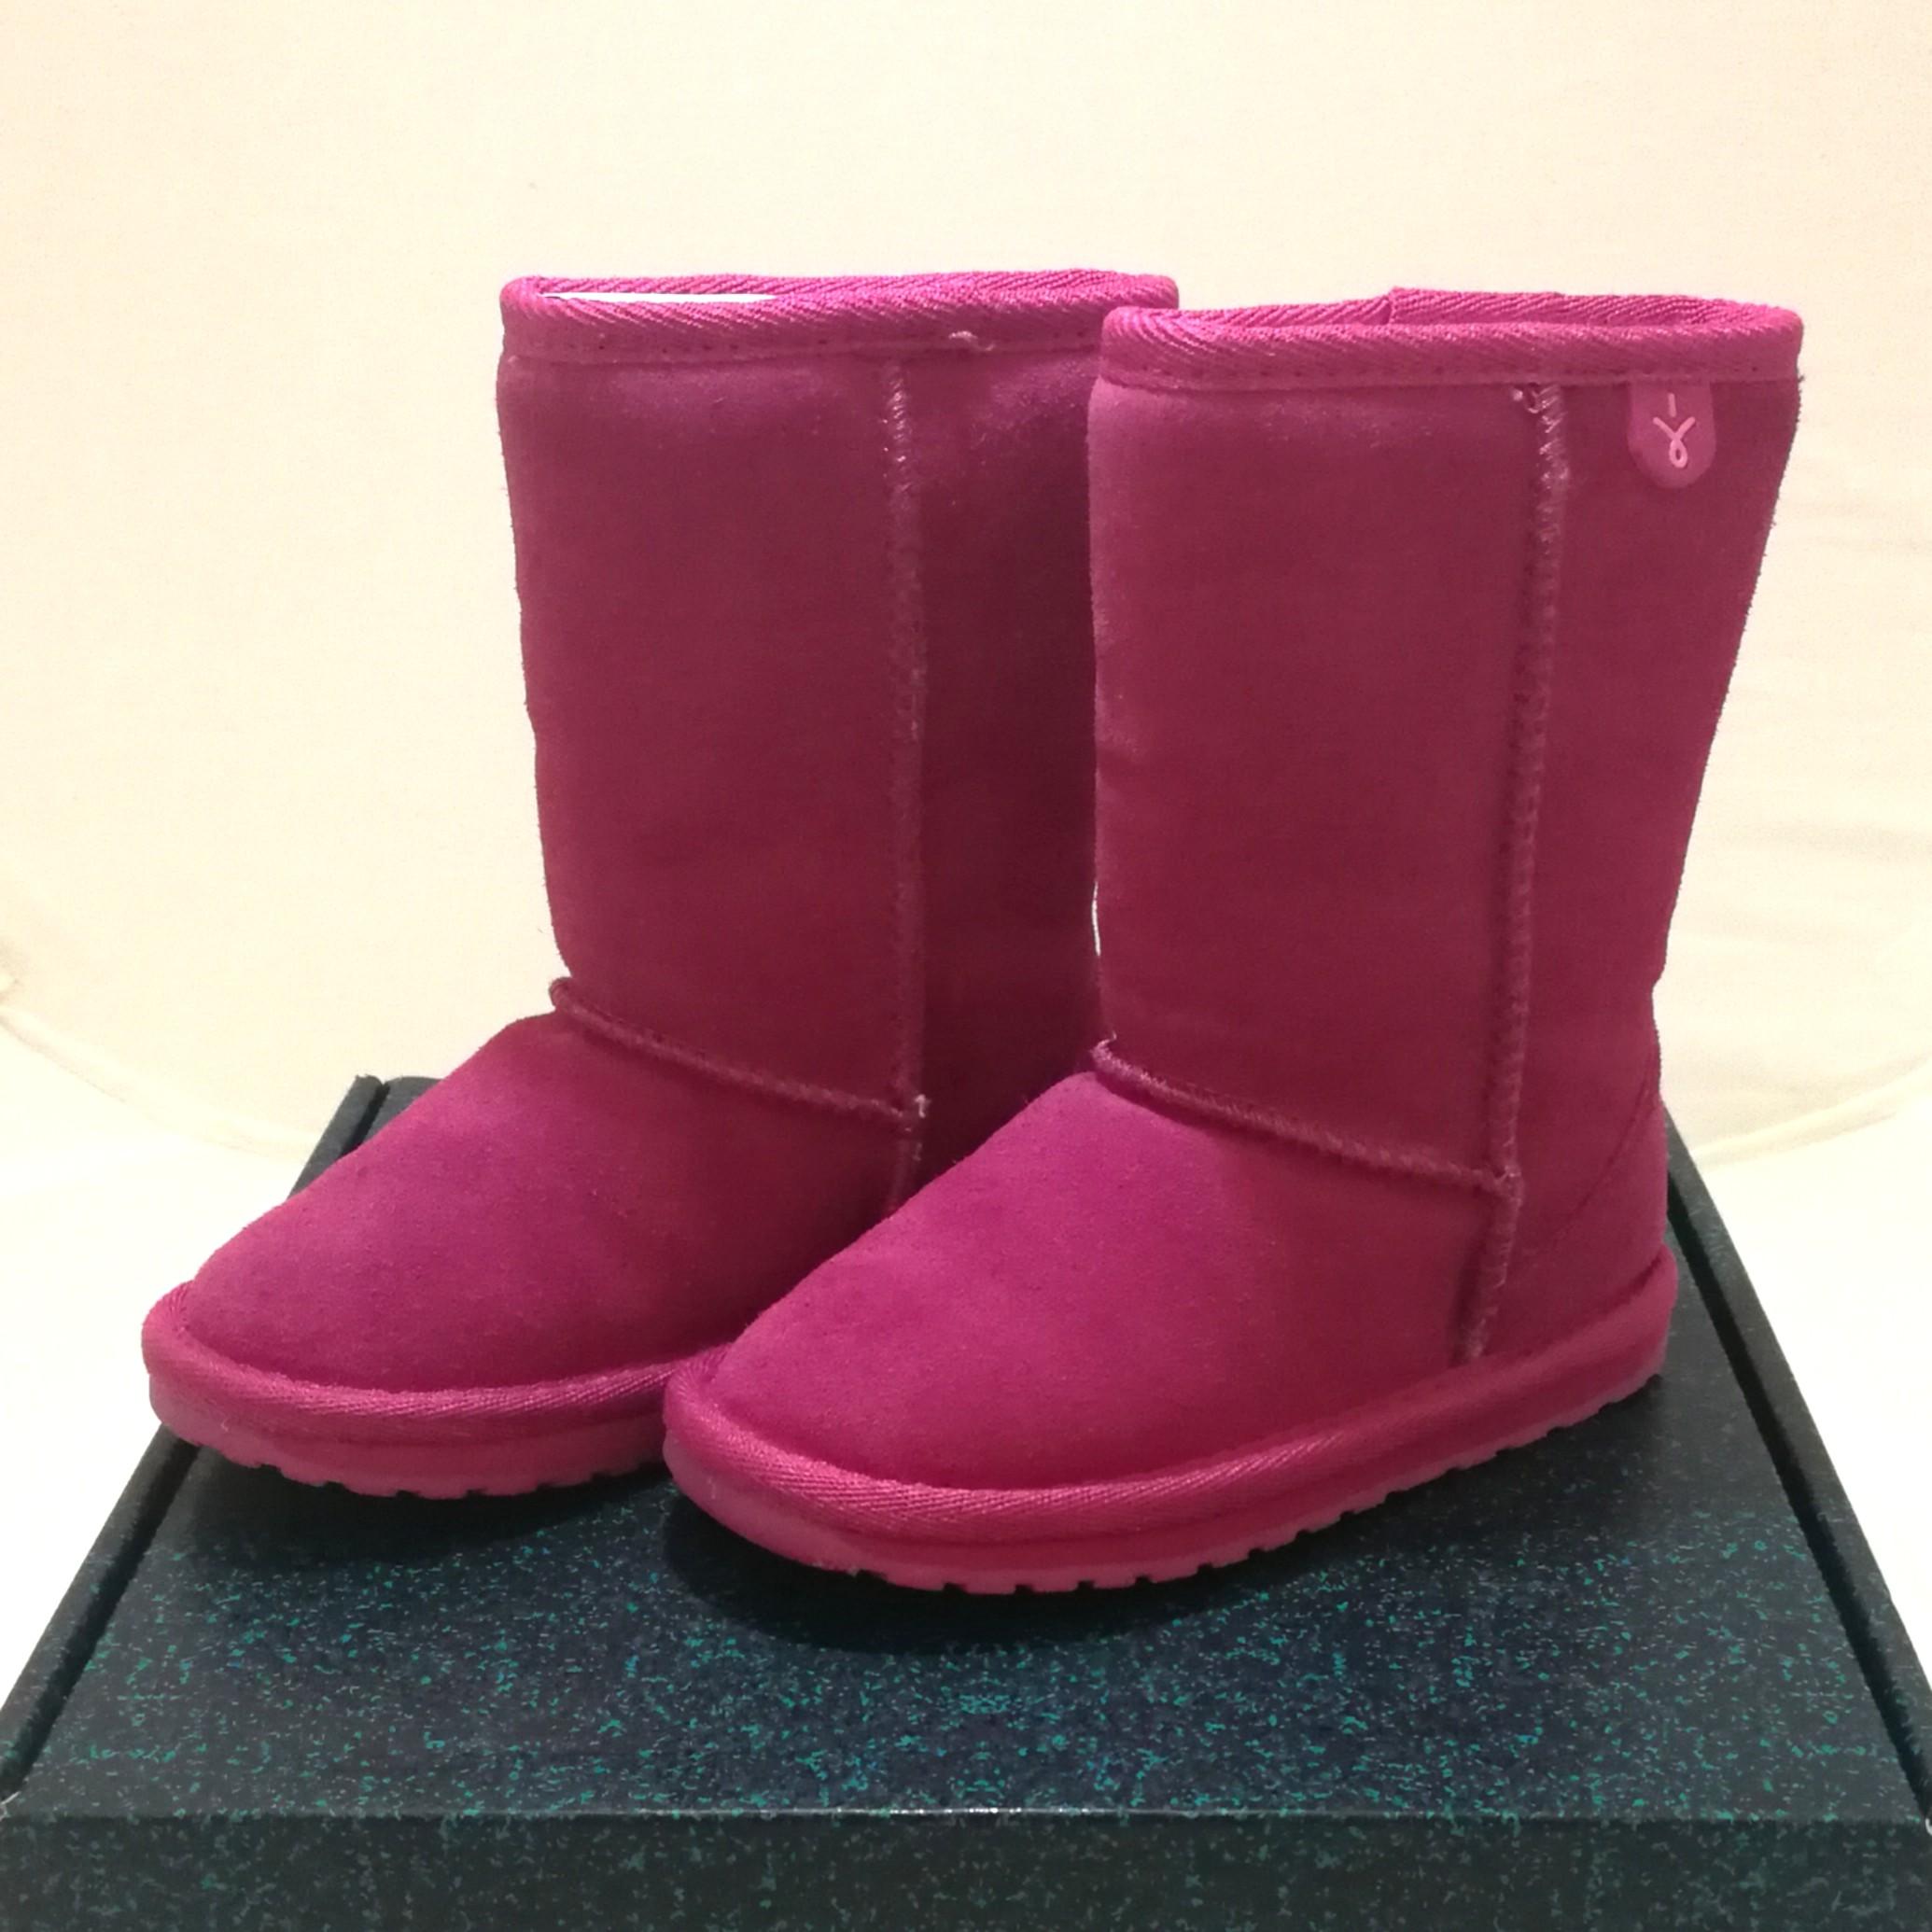 UGG Boots in Rose Pink, Toddler US8 